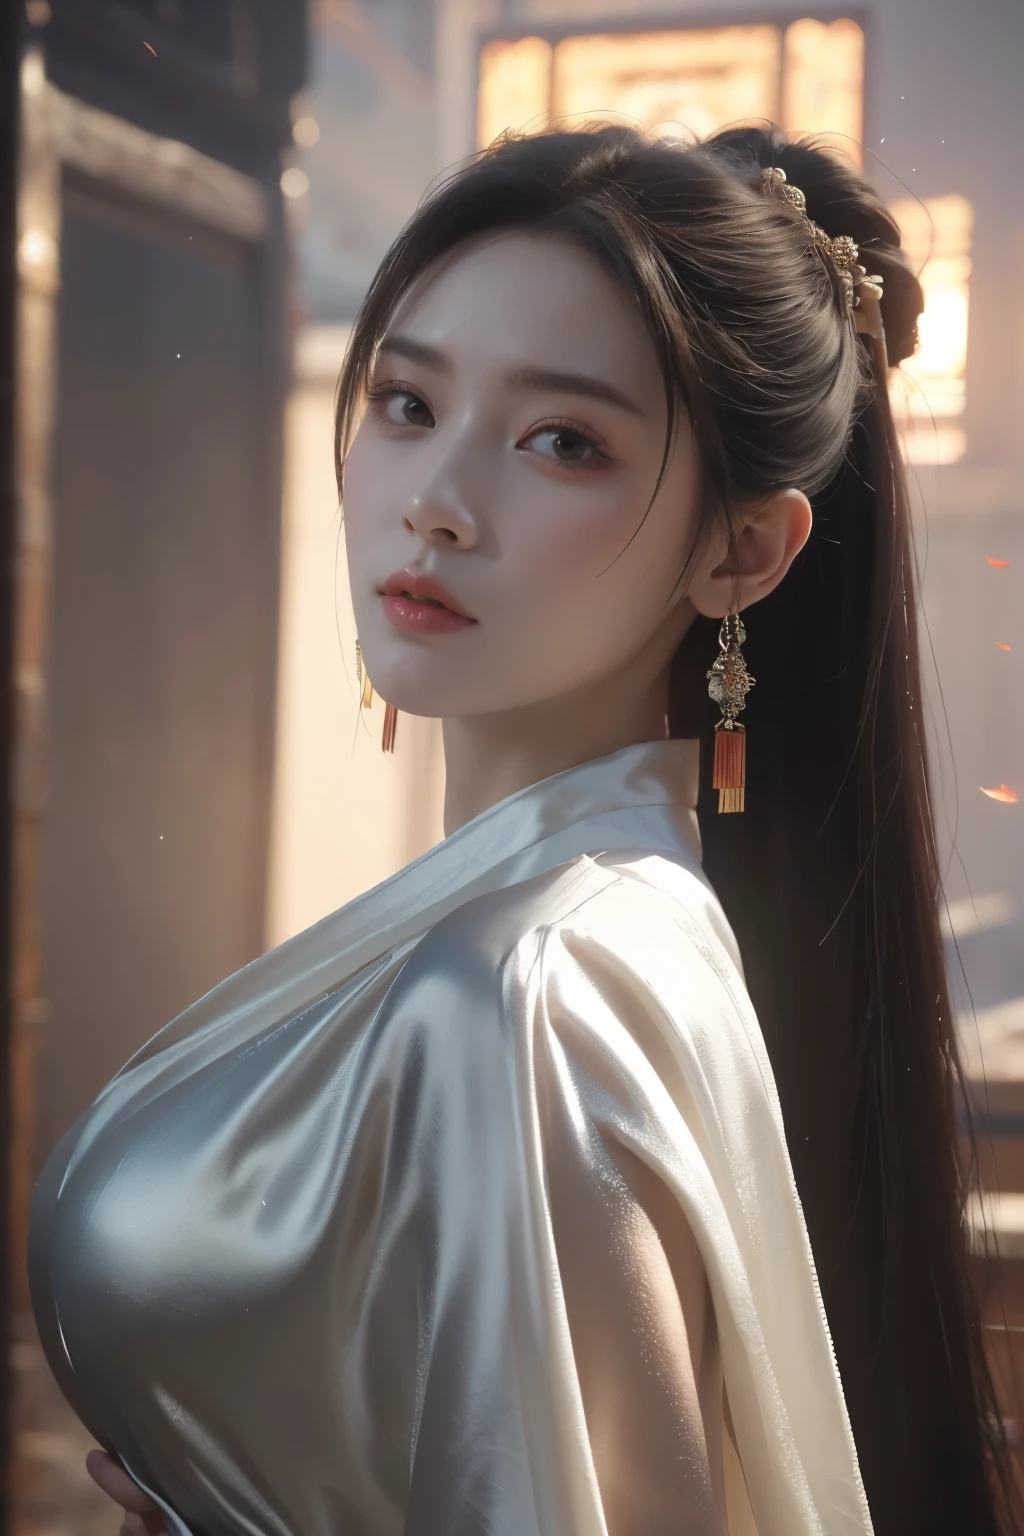 Game art，The best picture quality，Highest resolution，8K，((A bust photograph))，((Portrait))，((Head close-up))，(Rule of thirds)，Unreal Engine 5 rendering works， (The Girl of the Future)，(Female Warrior)， 22 year old girl，(Ancient Chinese women)，(Rainbow hair，Ancient Oriental hairstyle)，((The pupils of the red eyes:1.3))，(A beautiful eye full of detail)，(Big breasts)，(Eye shadow)，Elegant and charming，indifferent，((Anger))，(A silk coat with ancient Chinese style，Bellyband，The clothes are decorated with patterns with Chinese characteristics，A flash of jewellery，White)，(The clothes are made of silk:1.5)，figure，fantasy style， photo poses，city background，Movie lights，Ray tracing，Game CG，((3D Unreal Engine))，OC rendering reflection pattern